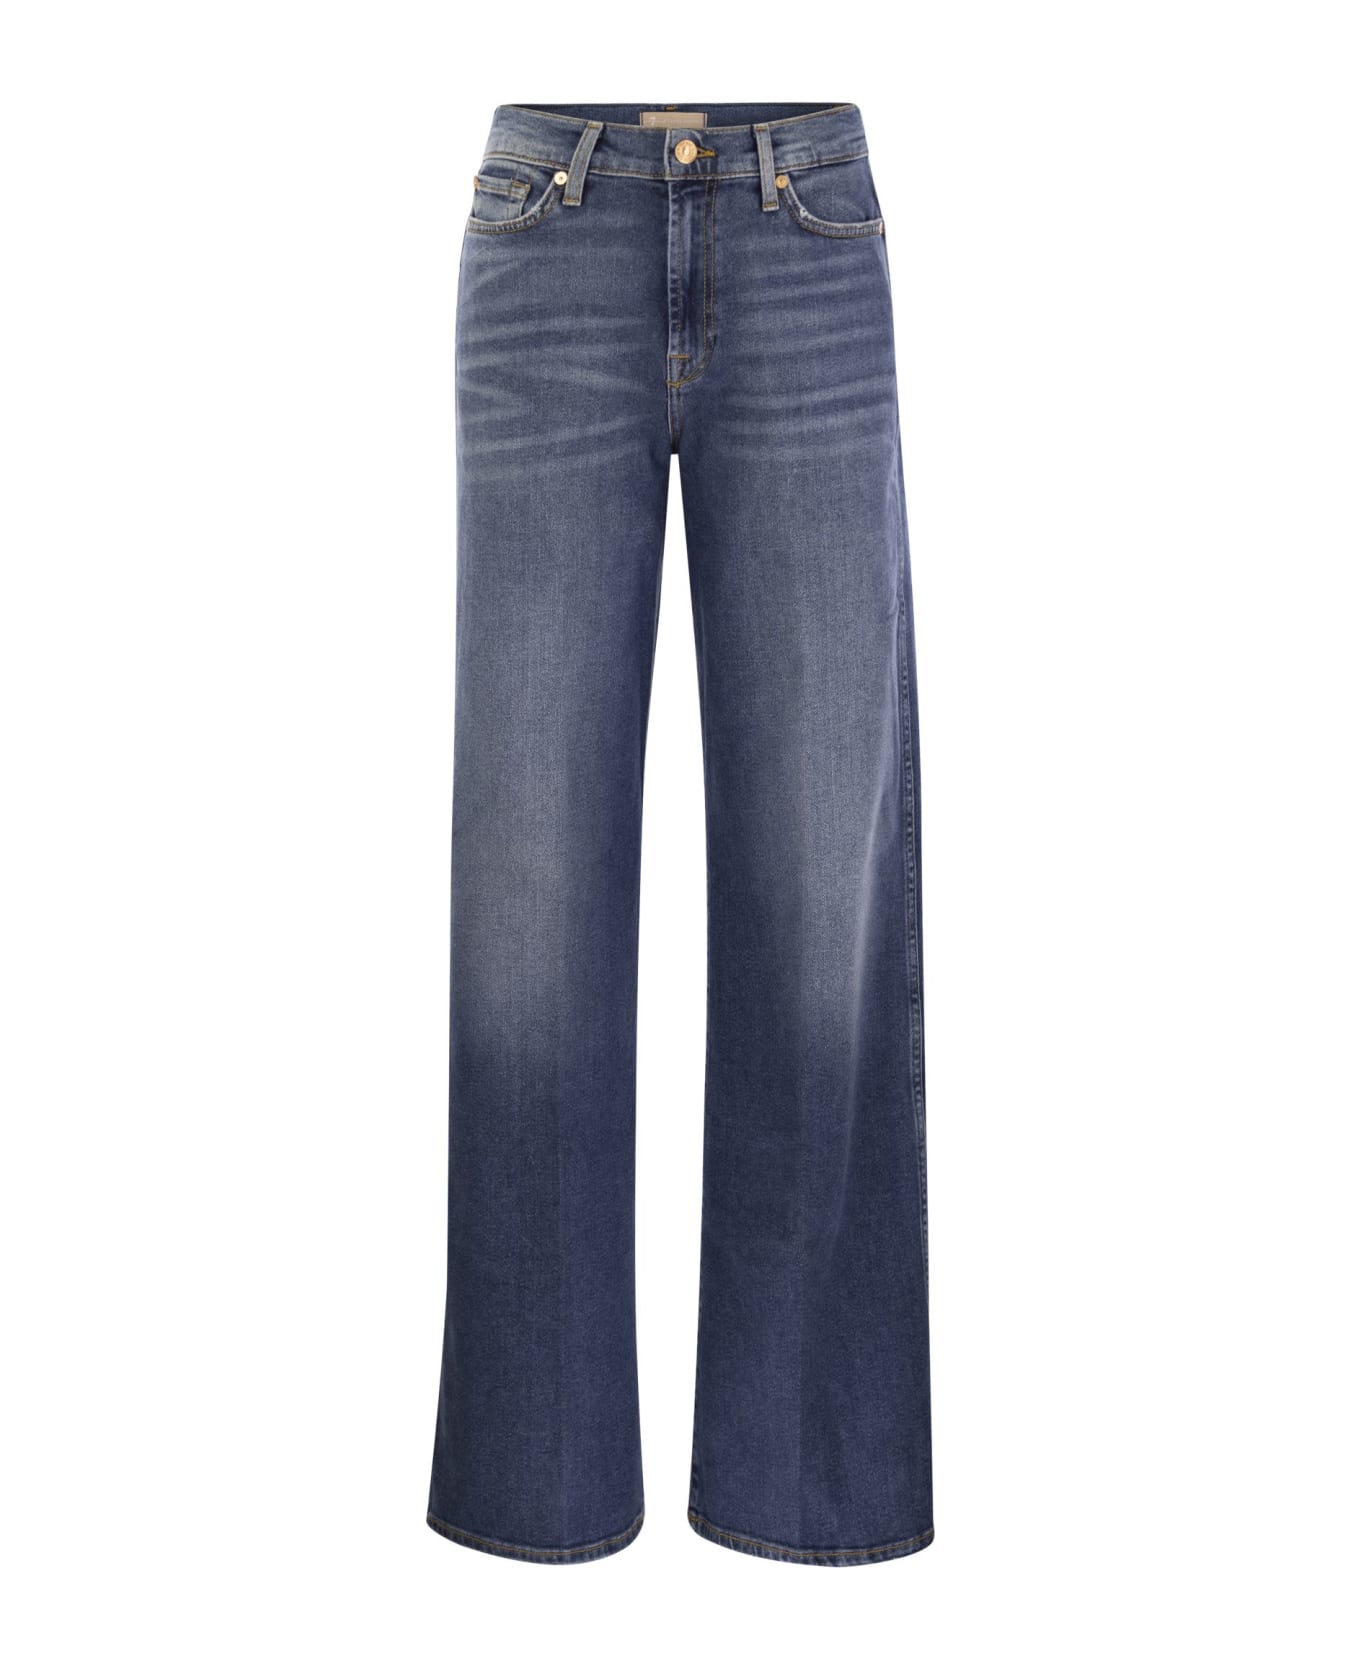 7 For All Mankind Lotta Luxe Vintage - High Waisted Jeans - Blue